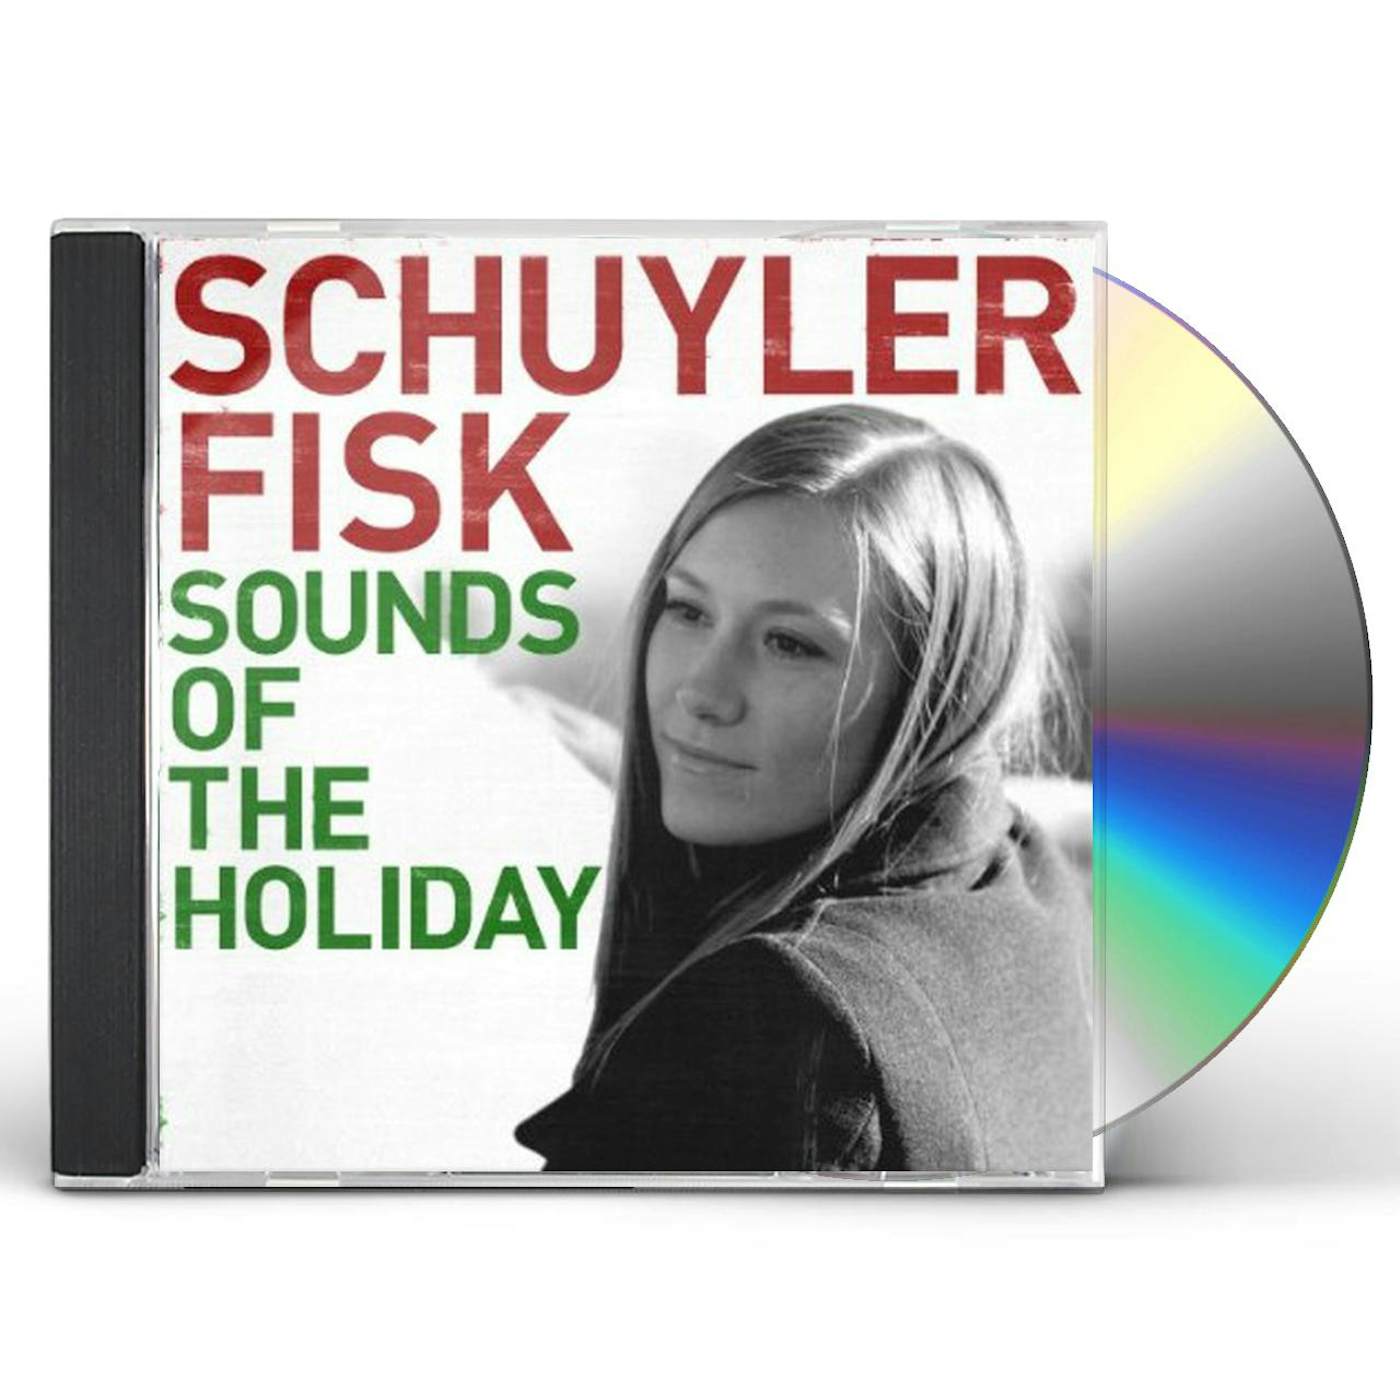 Schuyler Fisk SOUNDS OF THE HOLIDAY CD